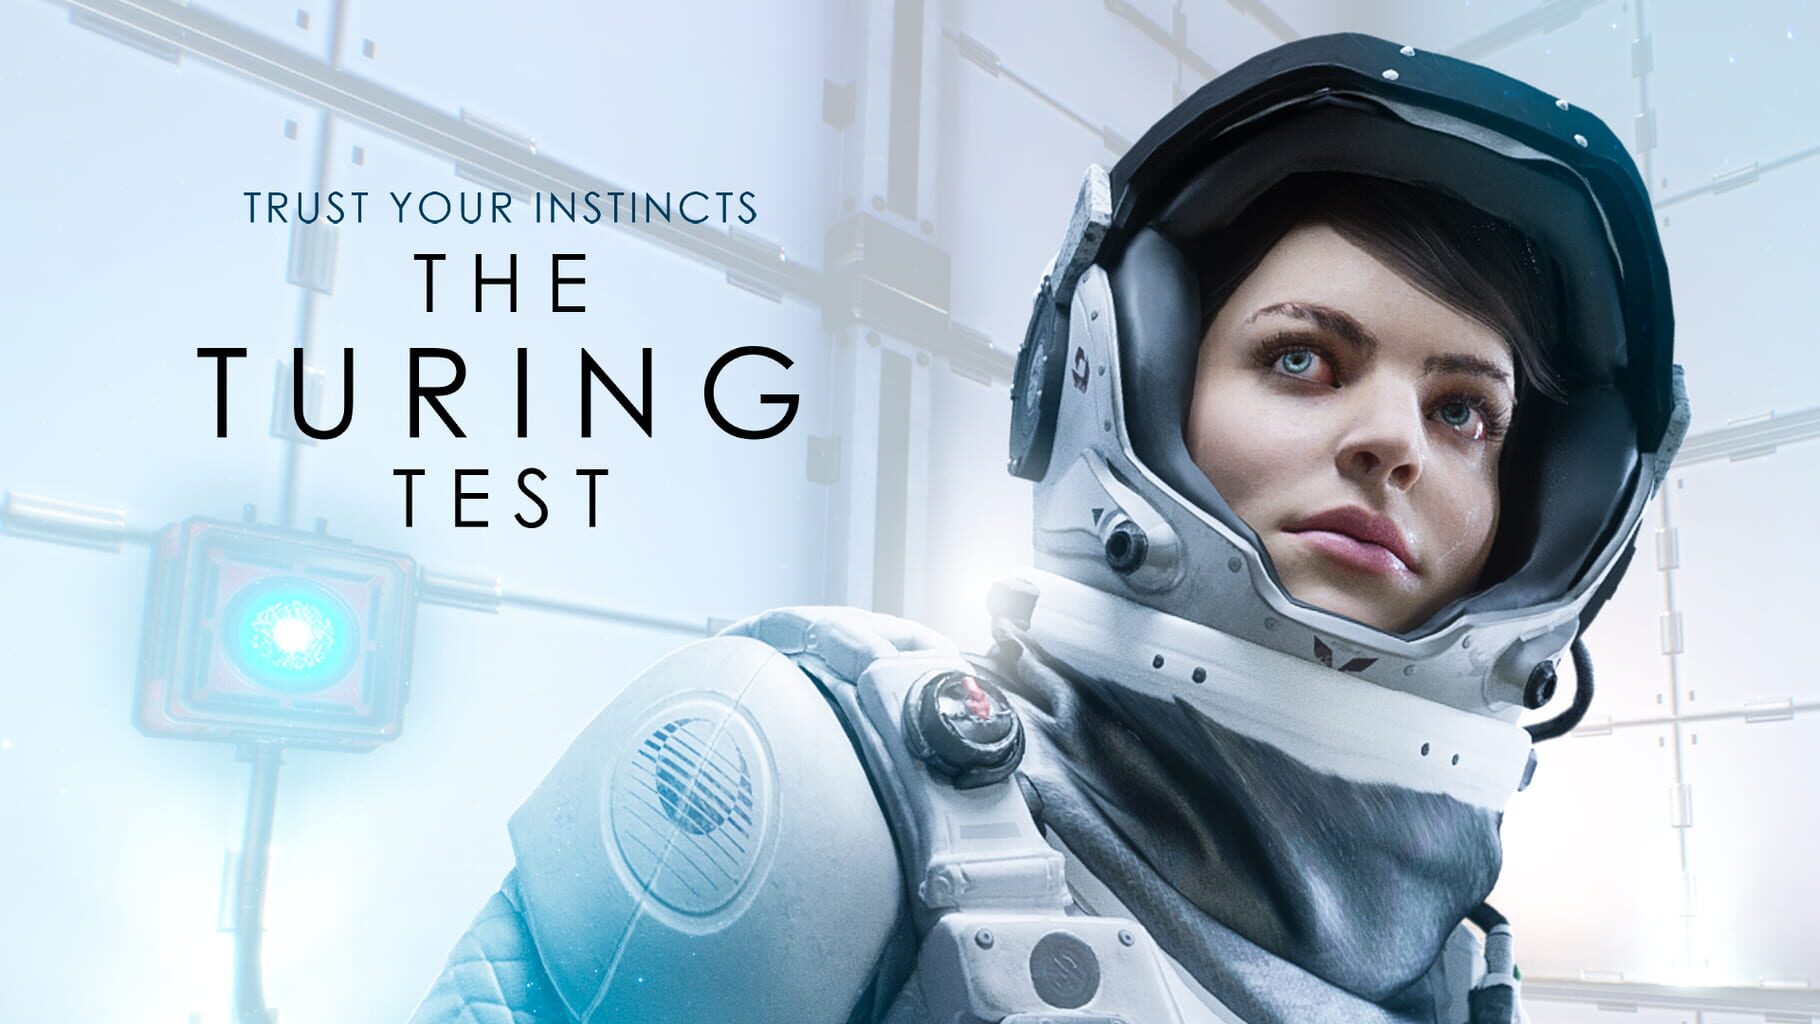 Artwork for The Turing Test